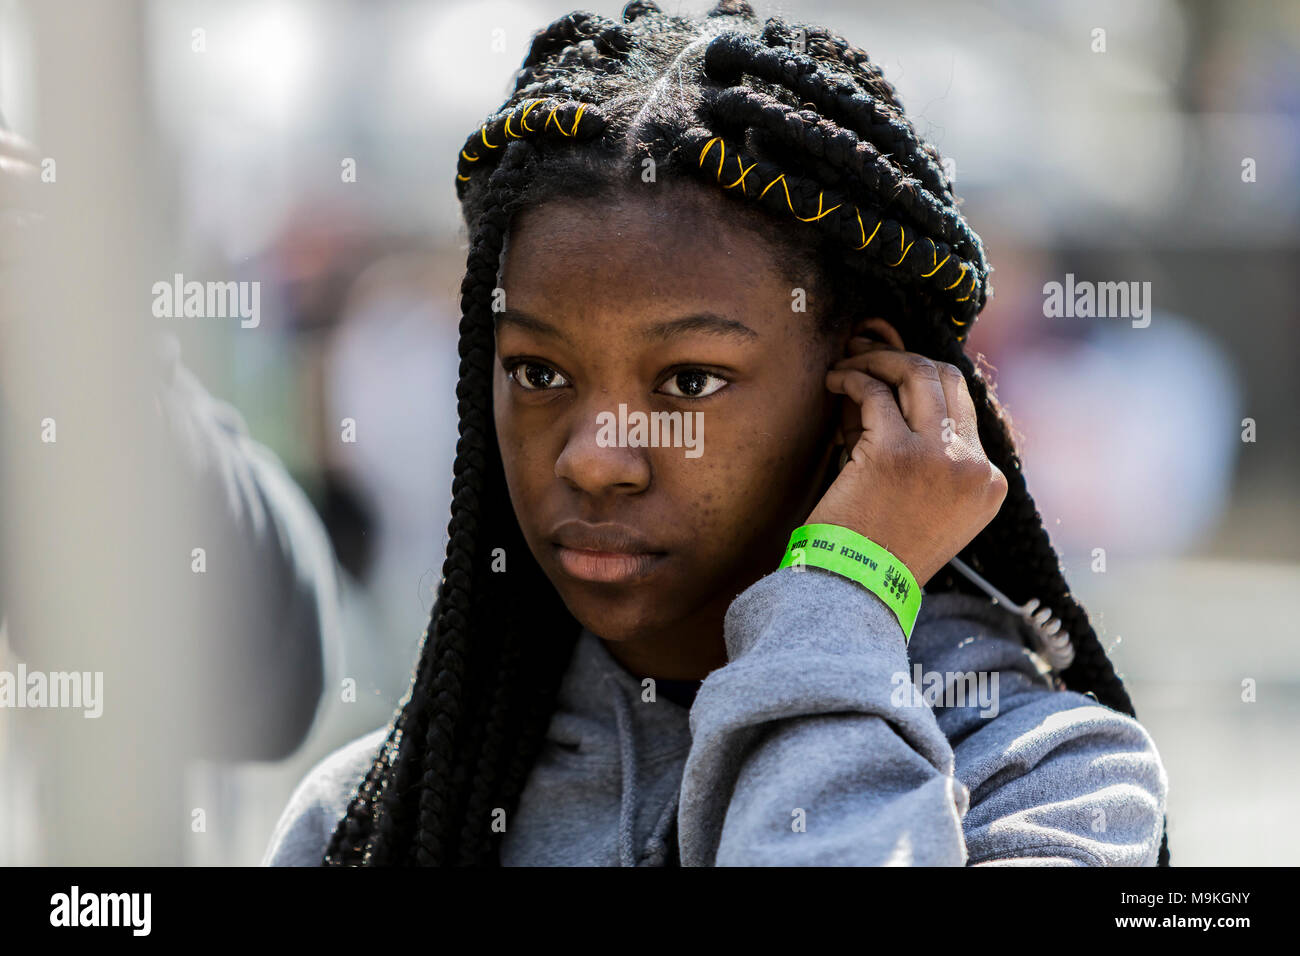 Washington Dc, United States. 24th Mar, 2018. Mya Middleton: 'I'm here because I've been personally affected by the lack of gun control and I believe guns have taken over the minds of individuals who want an easy way out of their dilemma.' Credit: Michael Nigro/Alamy Live News Stock Photo